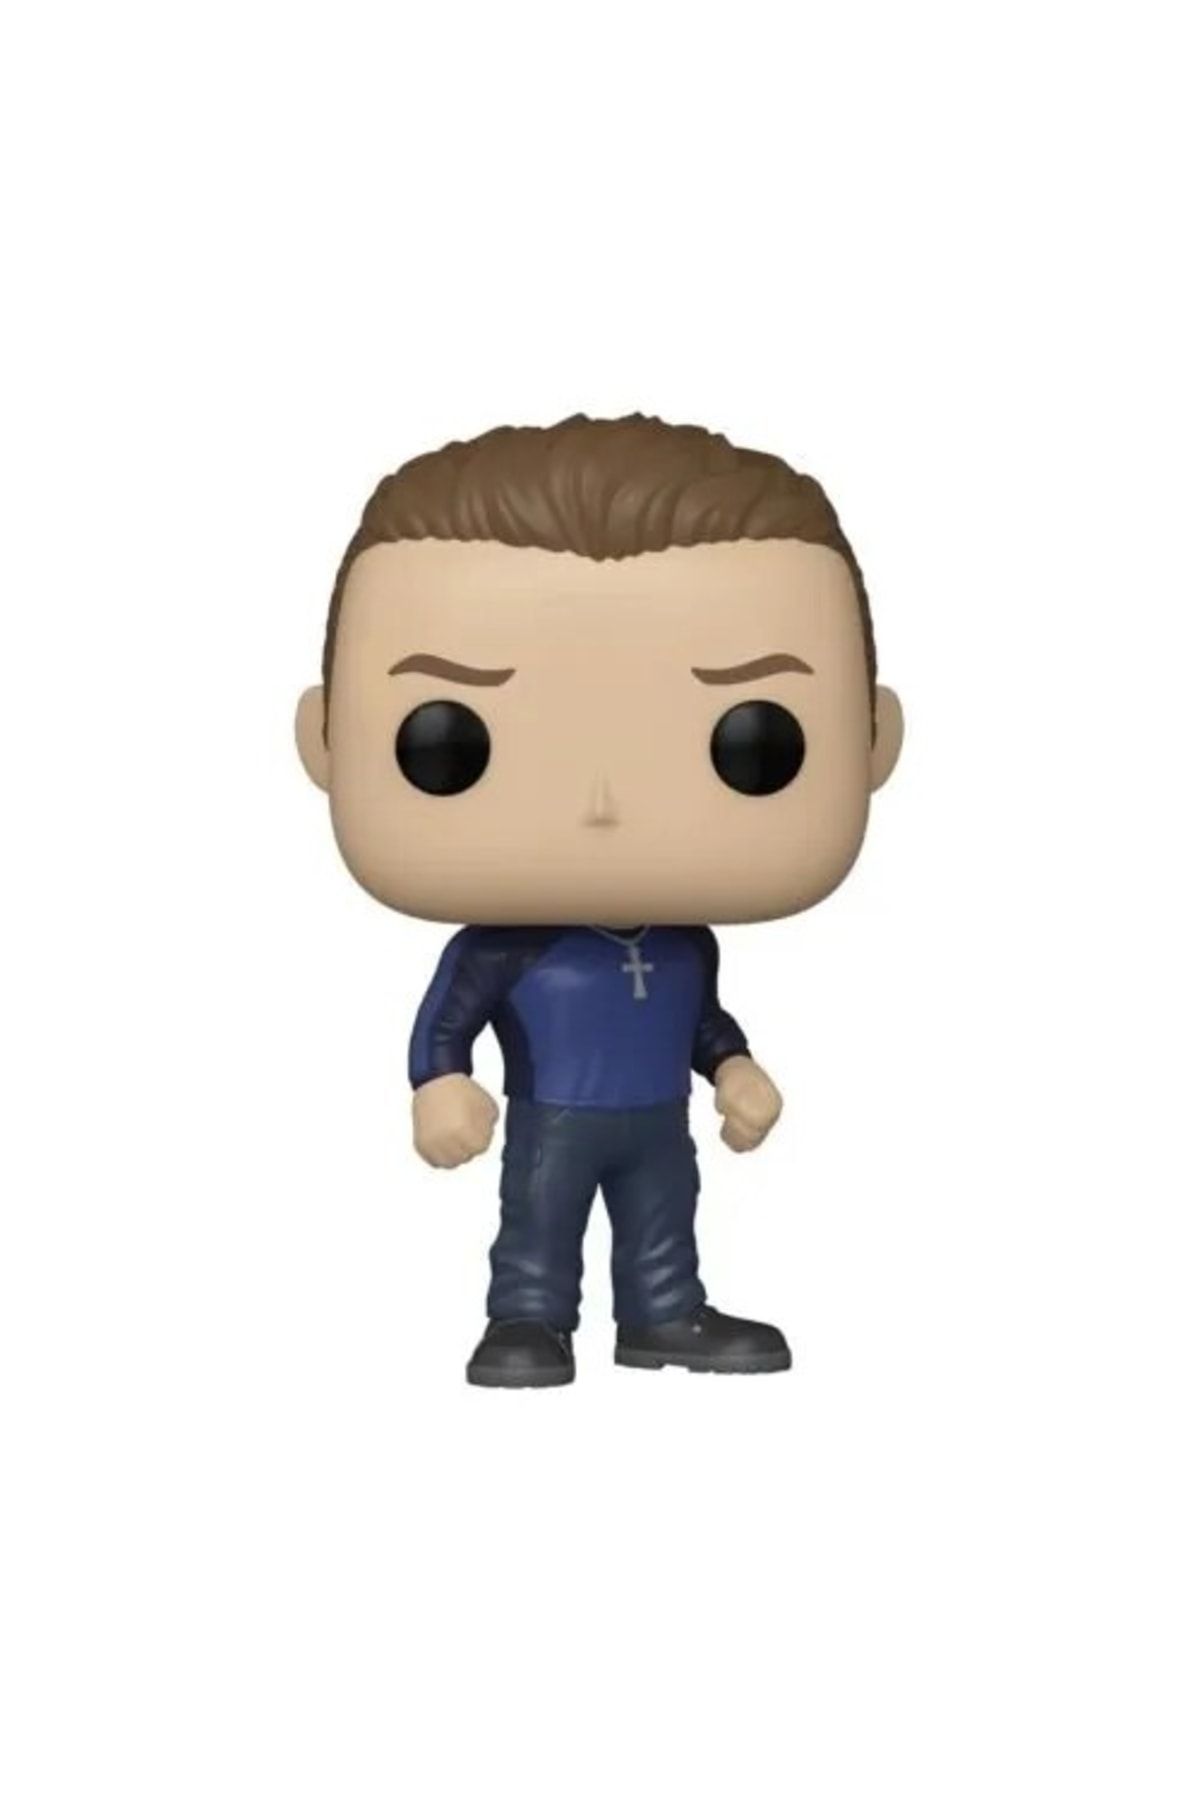 Funko Pop The Fast And The Furious 9 Jakob Toretto